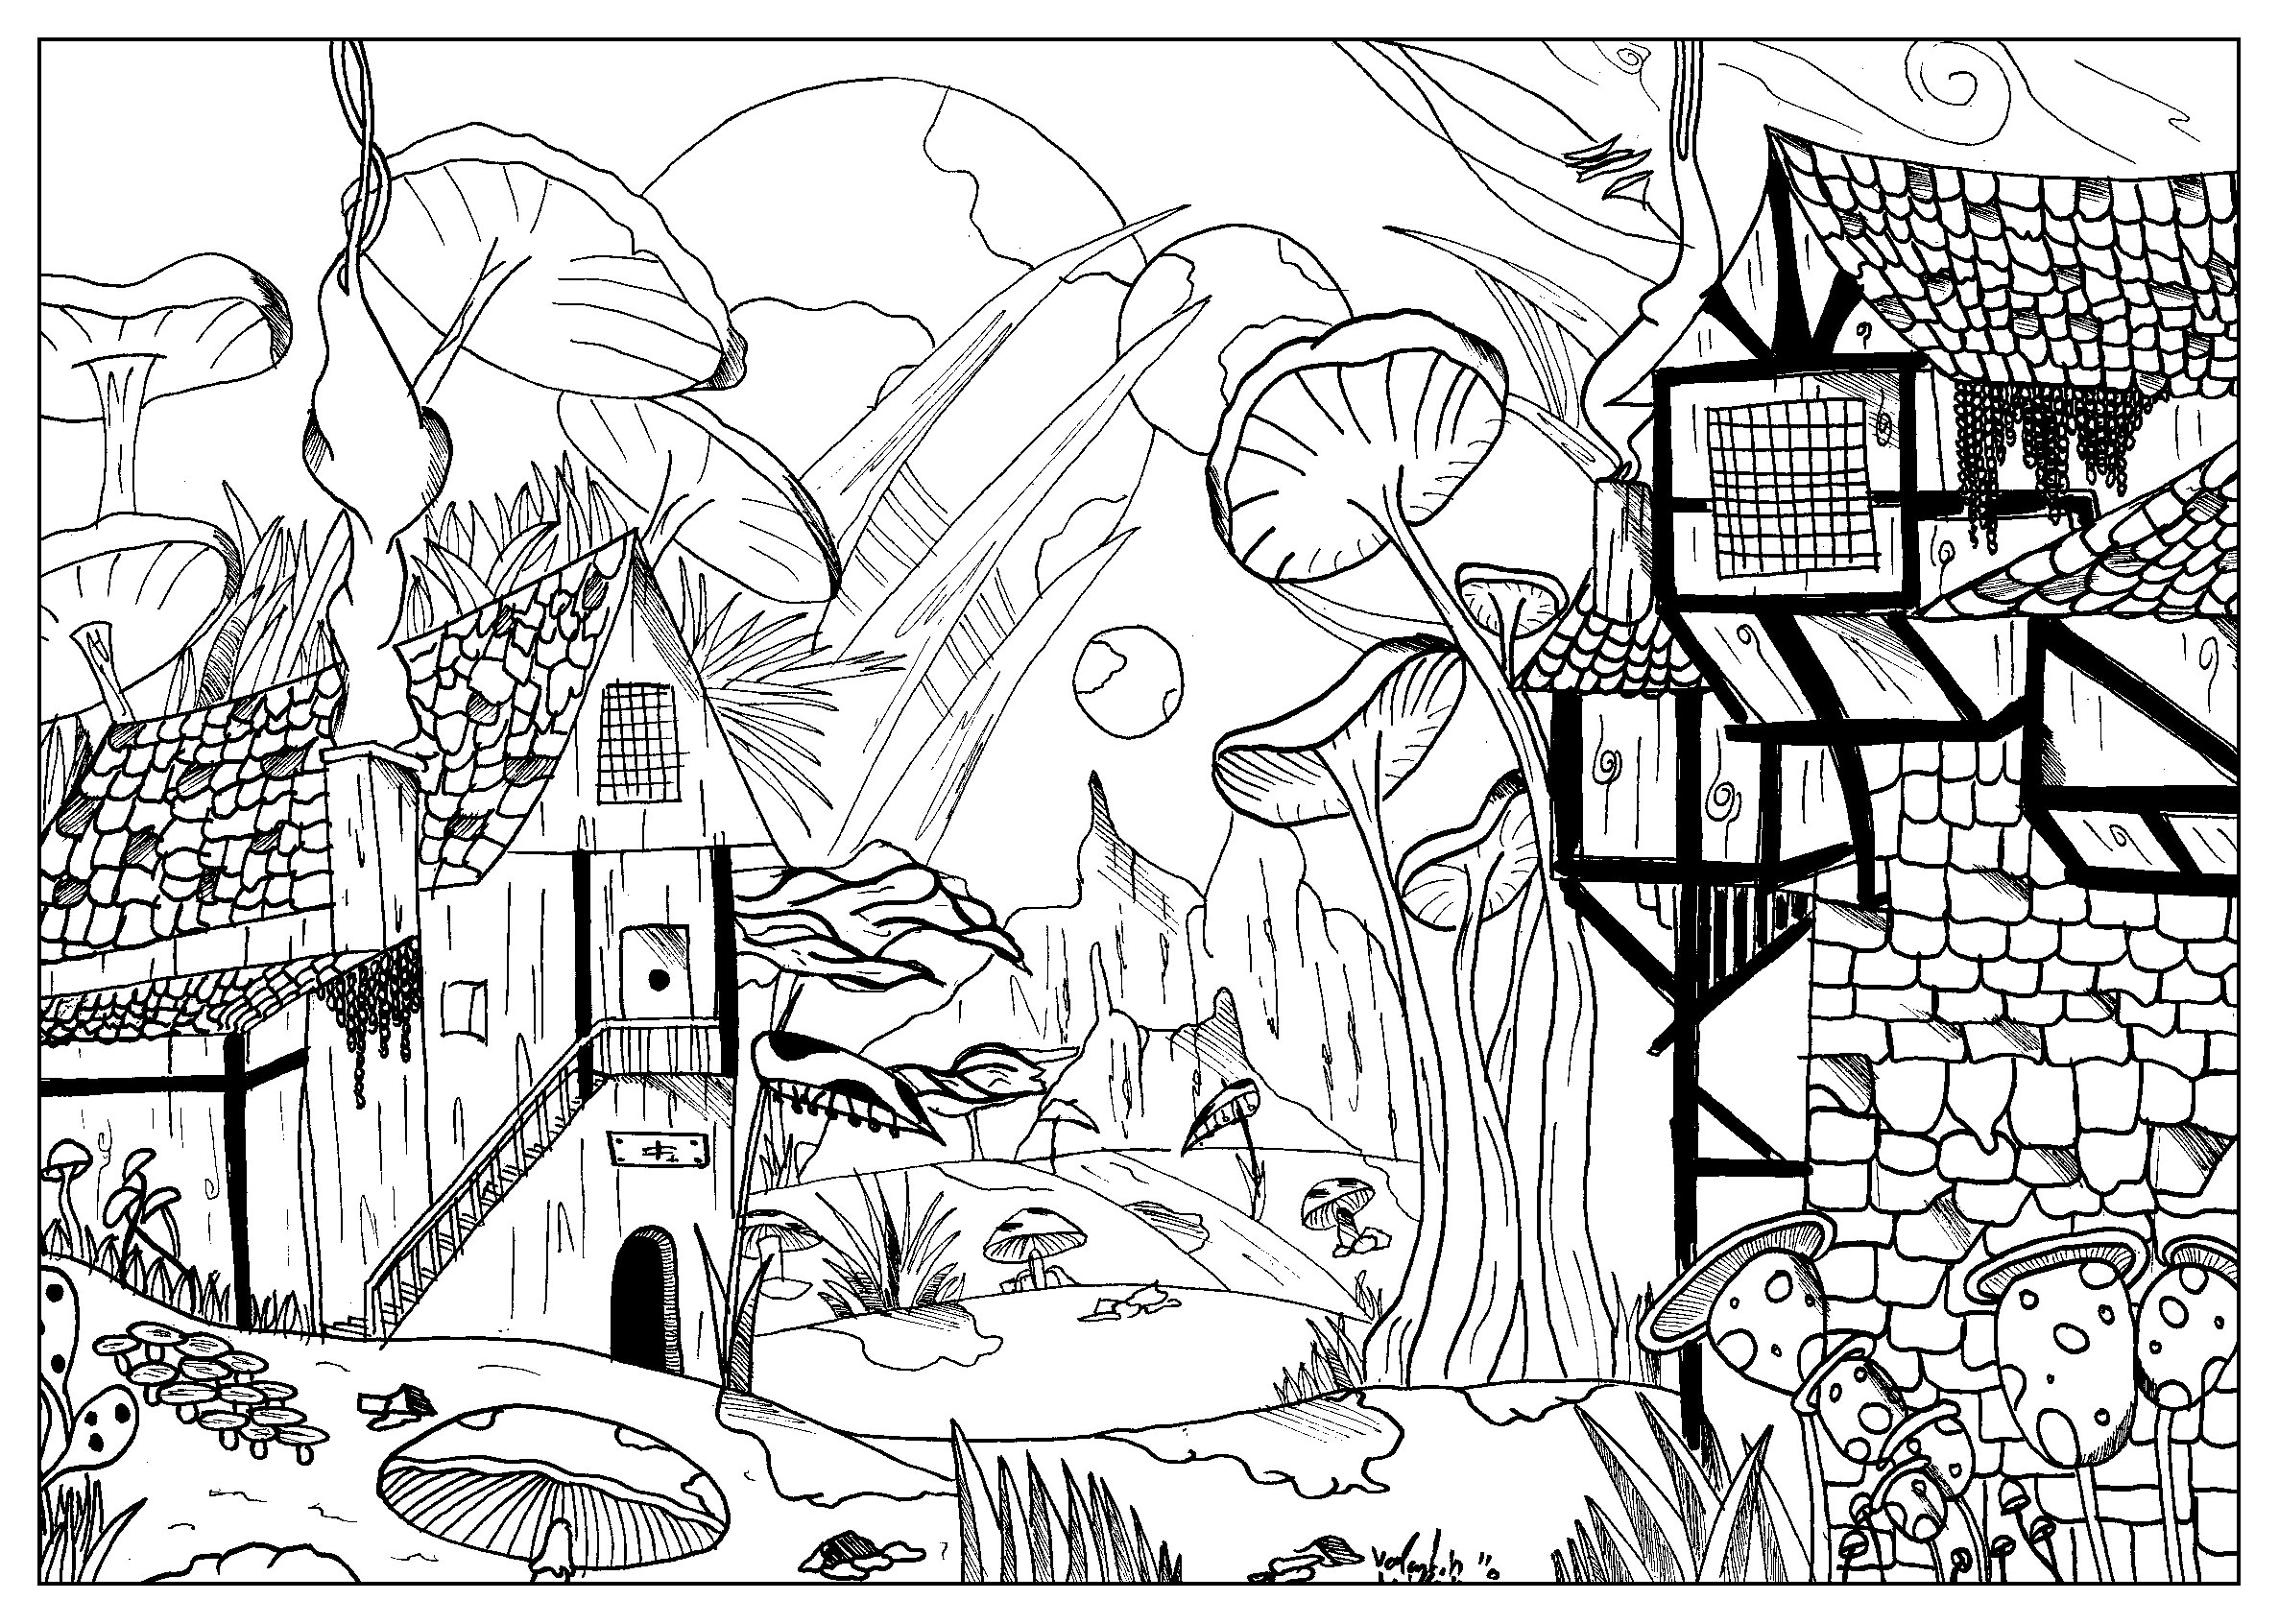 Coloring a small enchanted village. Here is a charming rural landscape, with houses surrounded by strange plant elements and giant mushrooms.Let your imagination run away .., Artist : Valentin